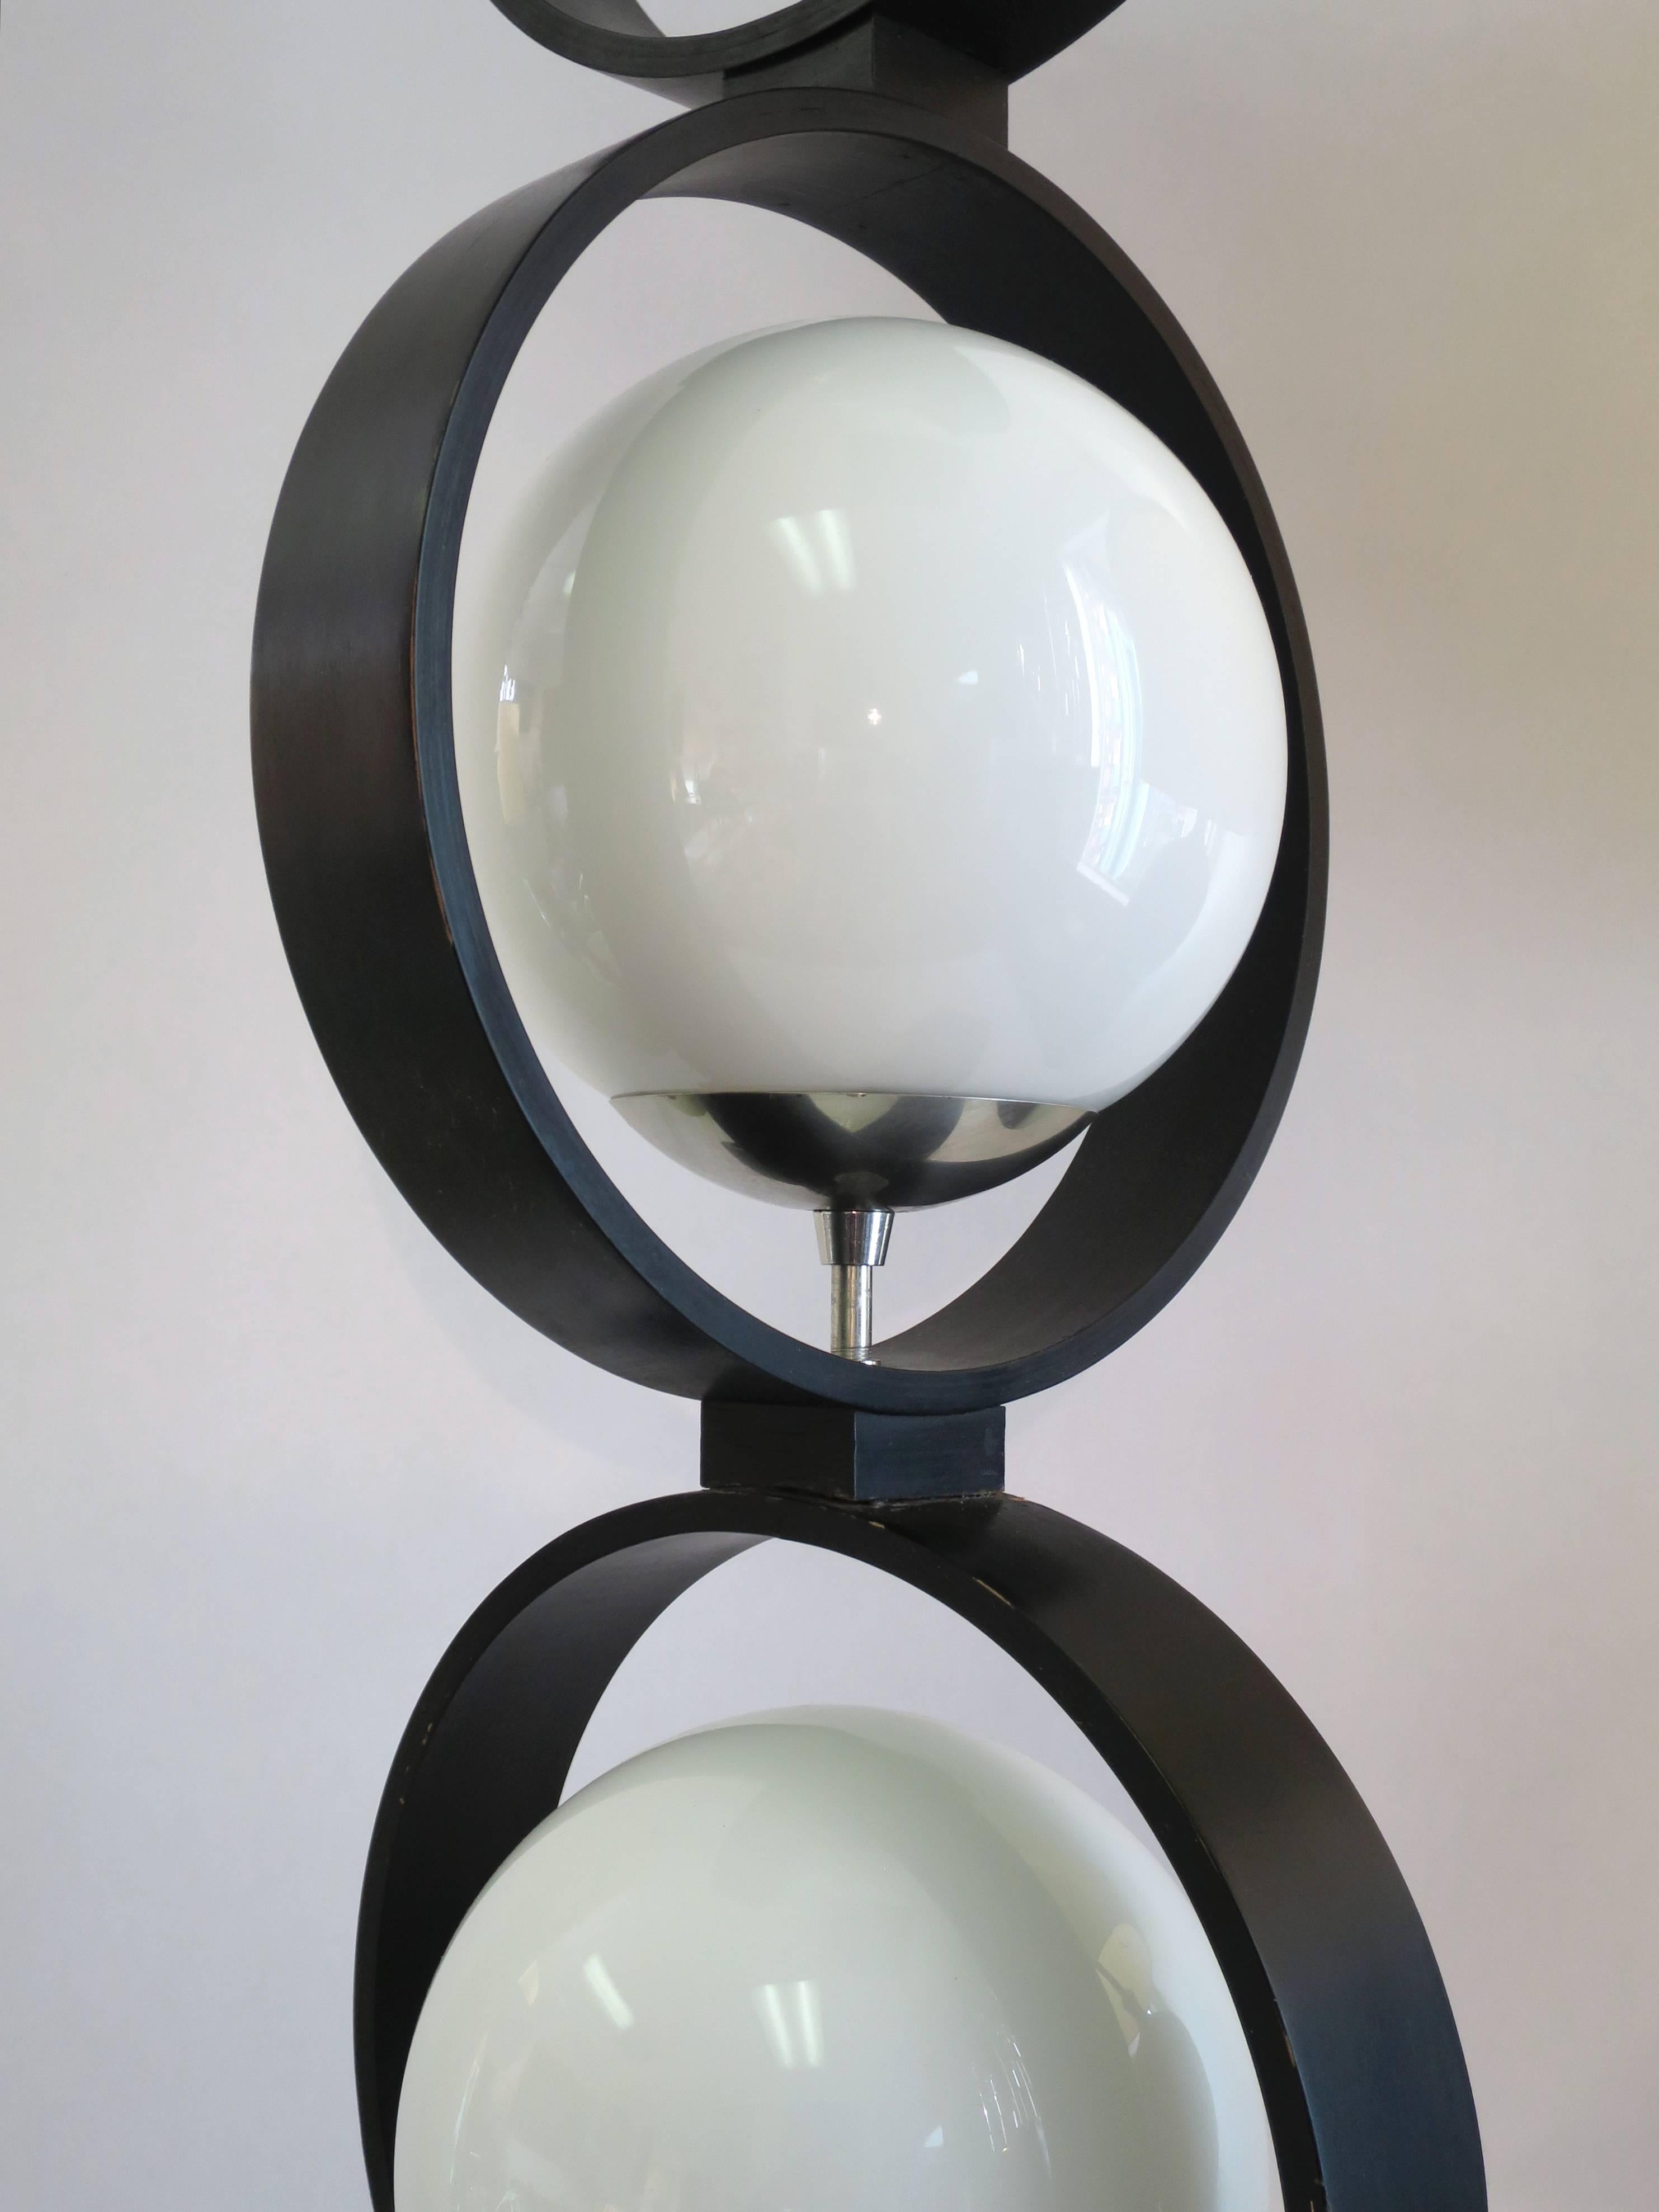 Black lacquered table lamp with frosted globes by Modeline, circa 1960s.